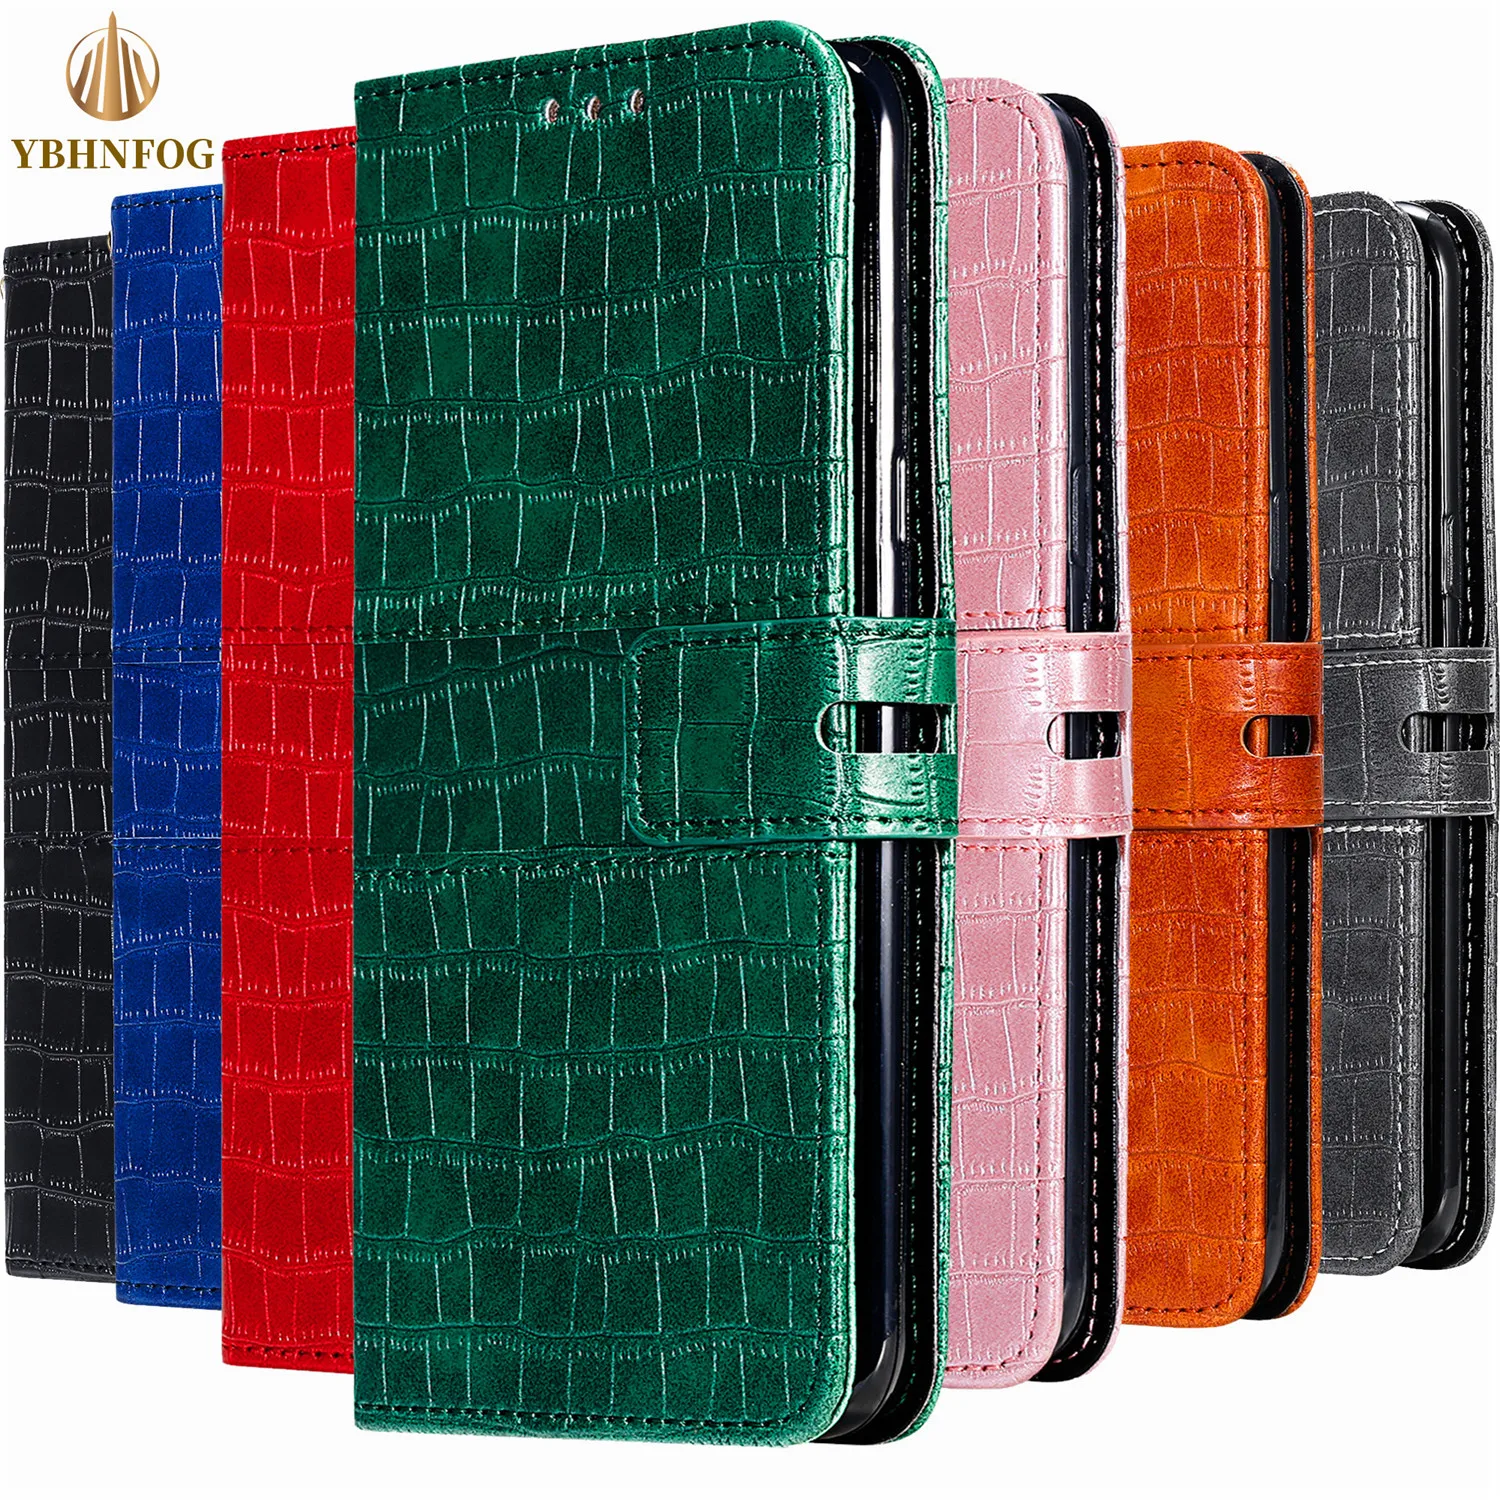 Luxury Wallet Phone Case For Samsung Galaxy S8 S9 Plus S10E S20 FE S21 Ultra S7 Edge Note 8 9 10 Leather Holder Flip Stand Cover